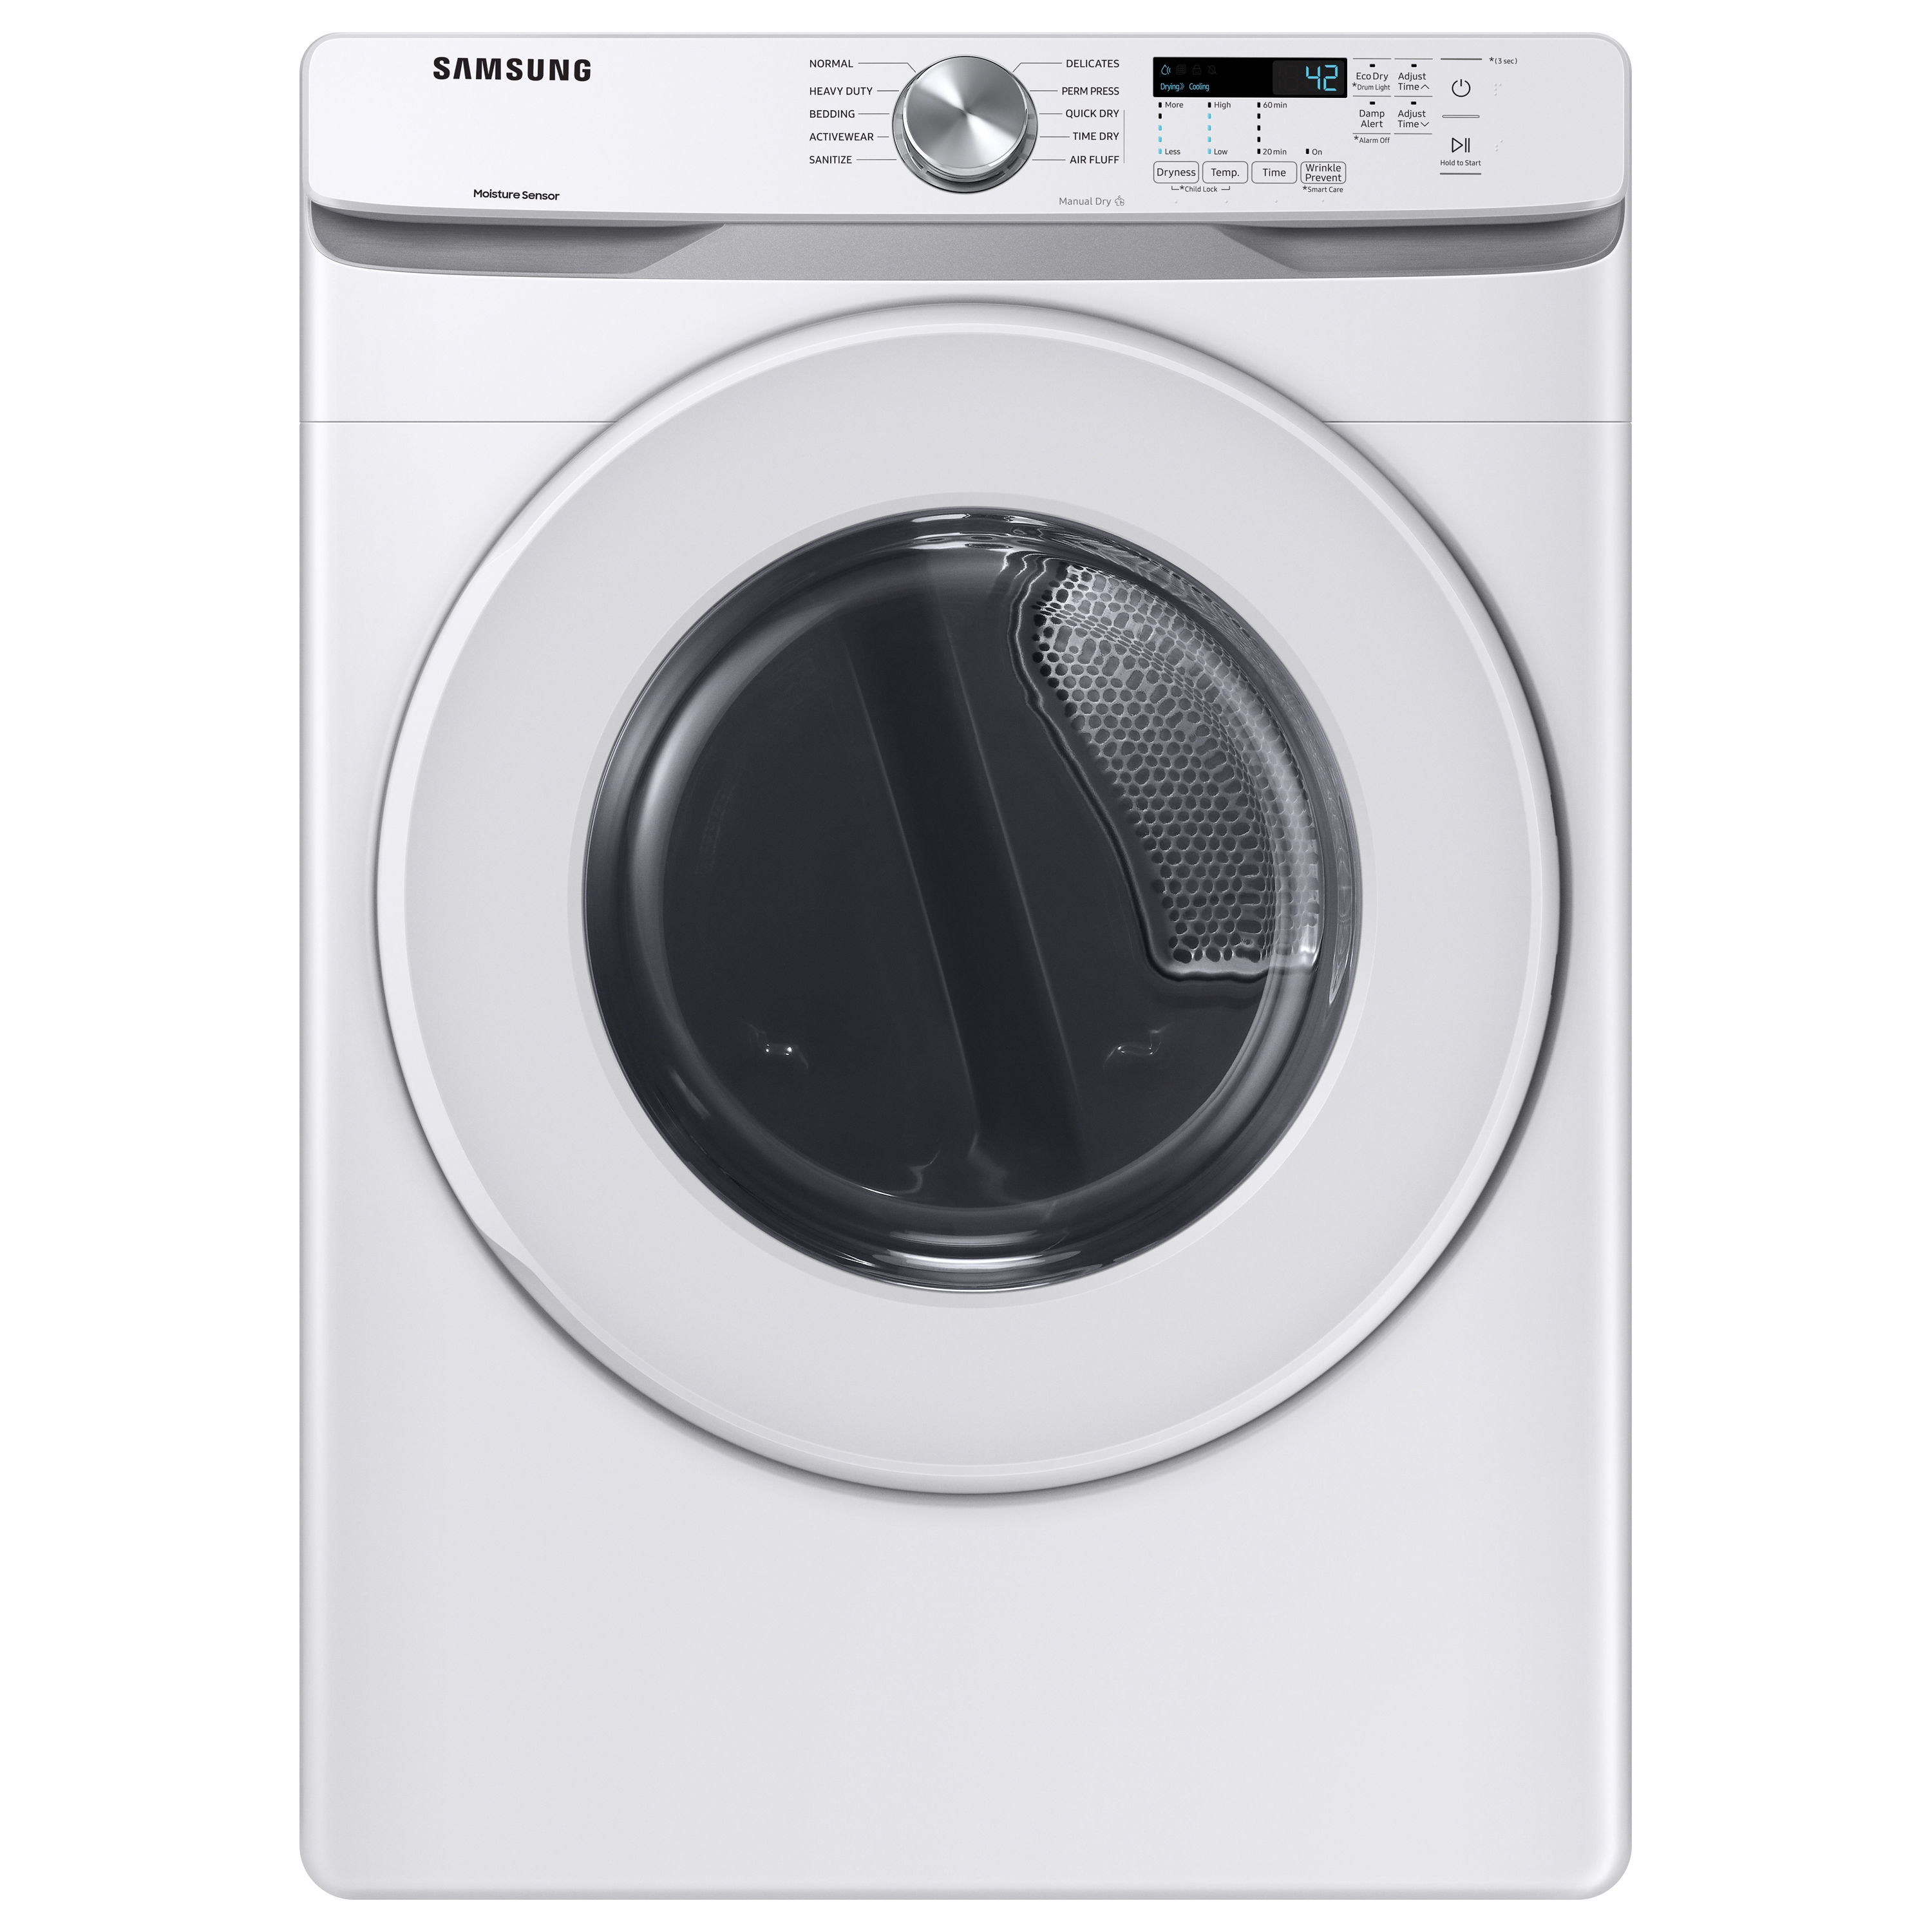 Samsung 7.5 cu. ft. Electric Long Vent Dryer with Sensor Dry in White(DVE45T6020W/A3)